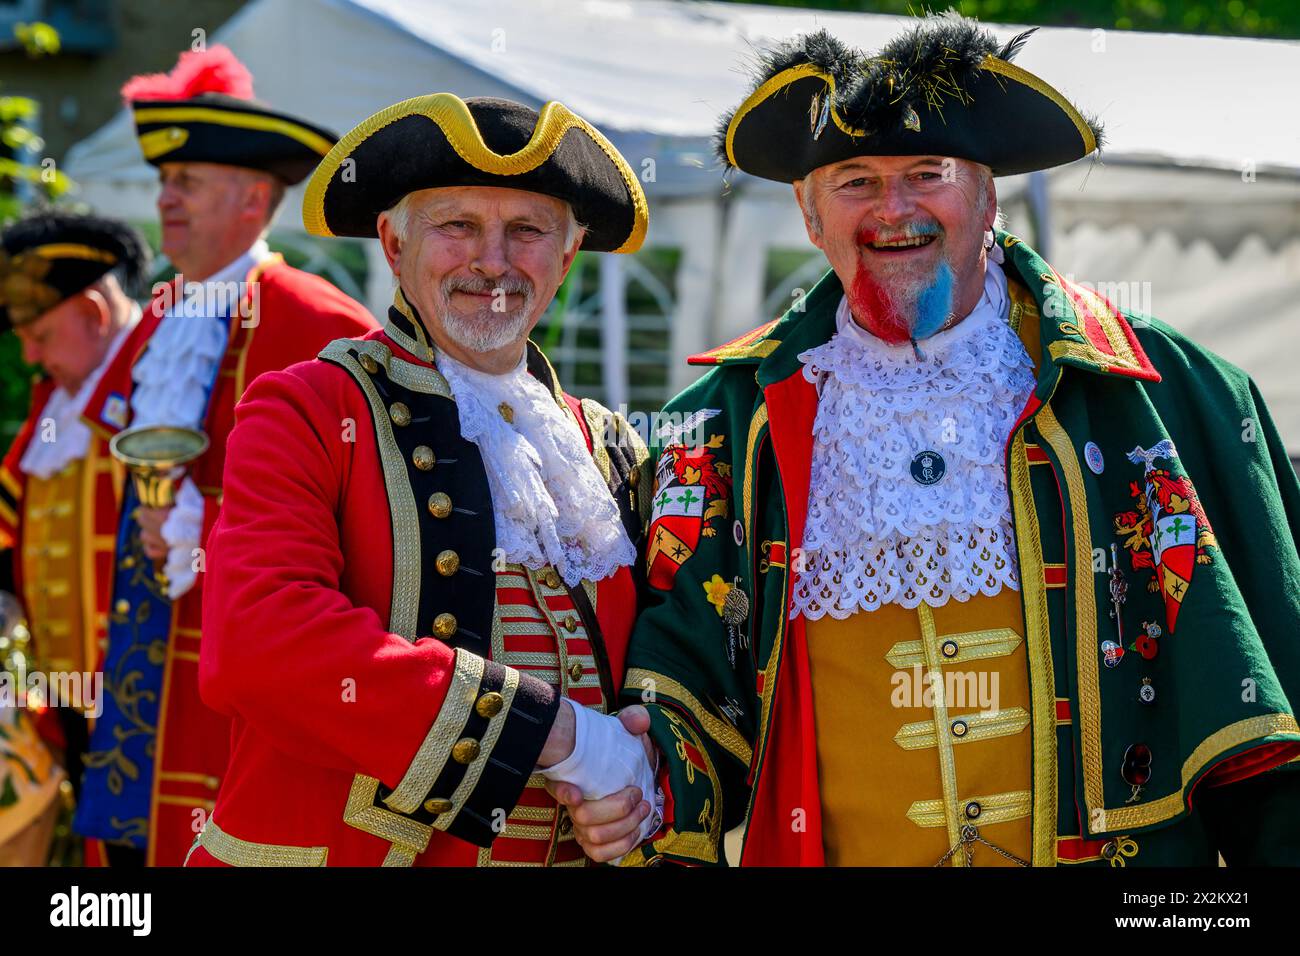 Town criers standing giving friendly handshake (colourful braided crier's livery) smile & pose looking at camera - Ilkley, West Yorkshire, England UK. Stock Photo